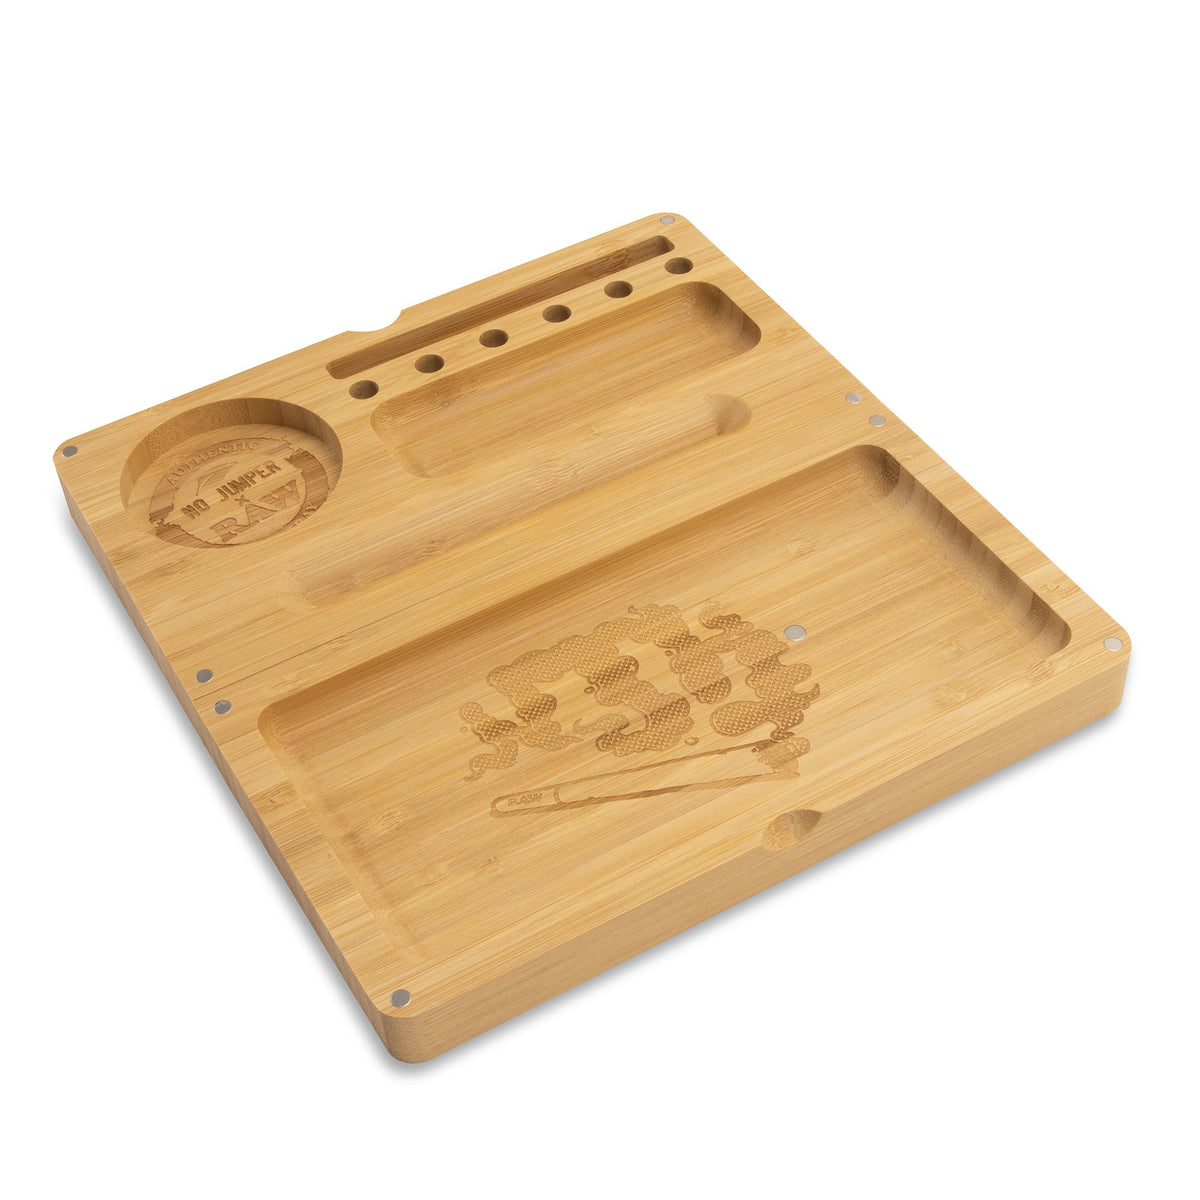 RAW X No Jumper Backflip Bamboo Rolling Tray Rolling Trays WAR00155-MUSA01 esd-official